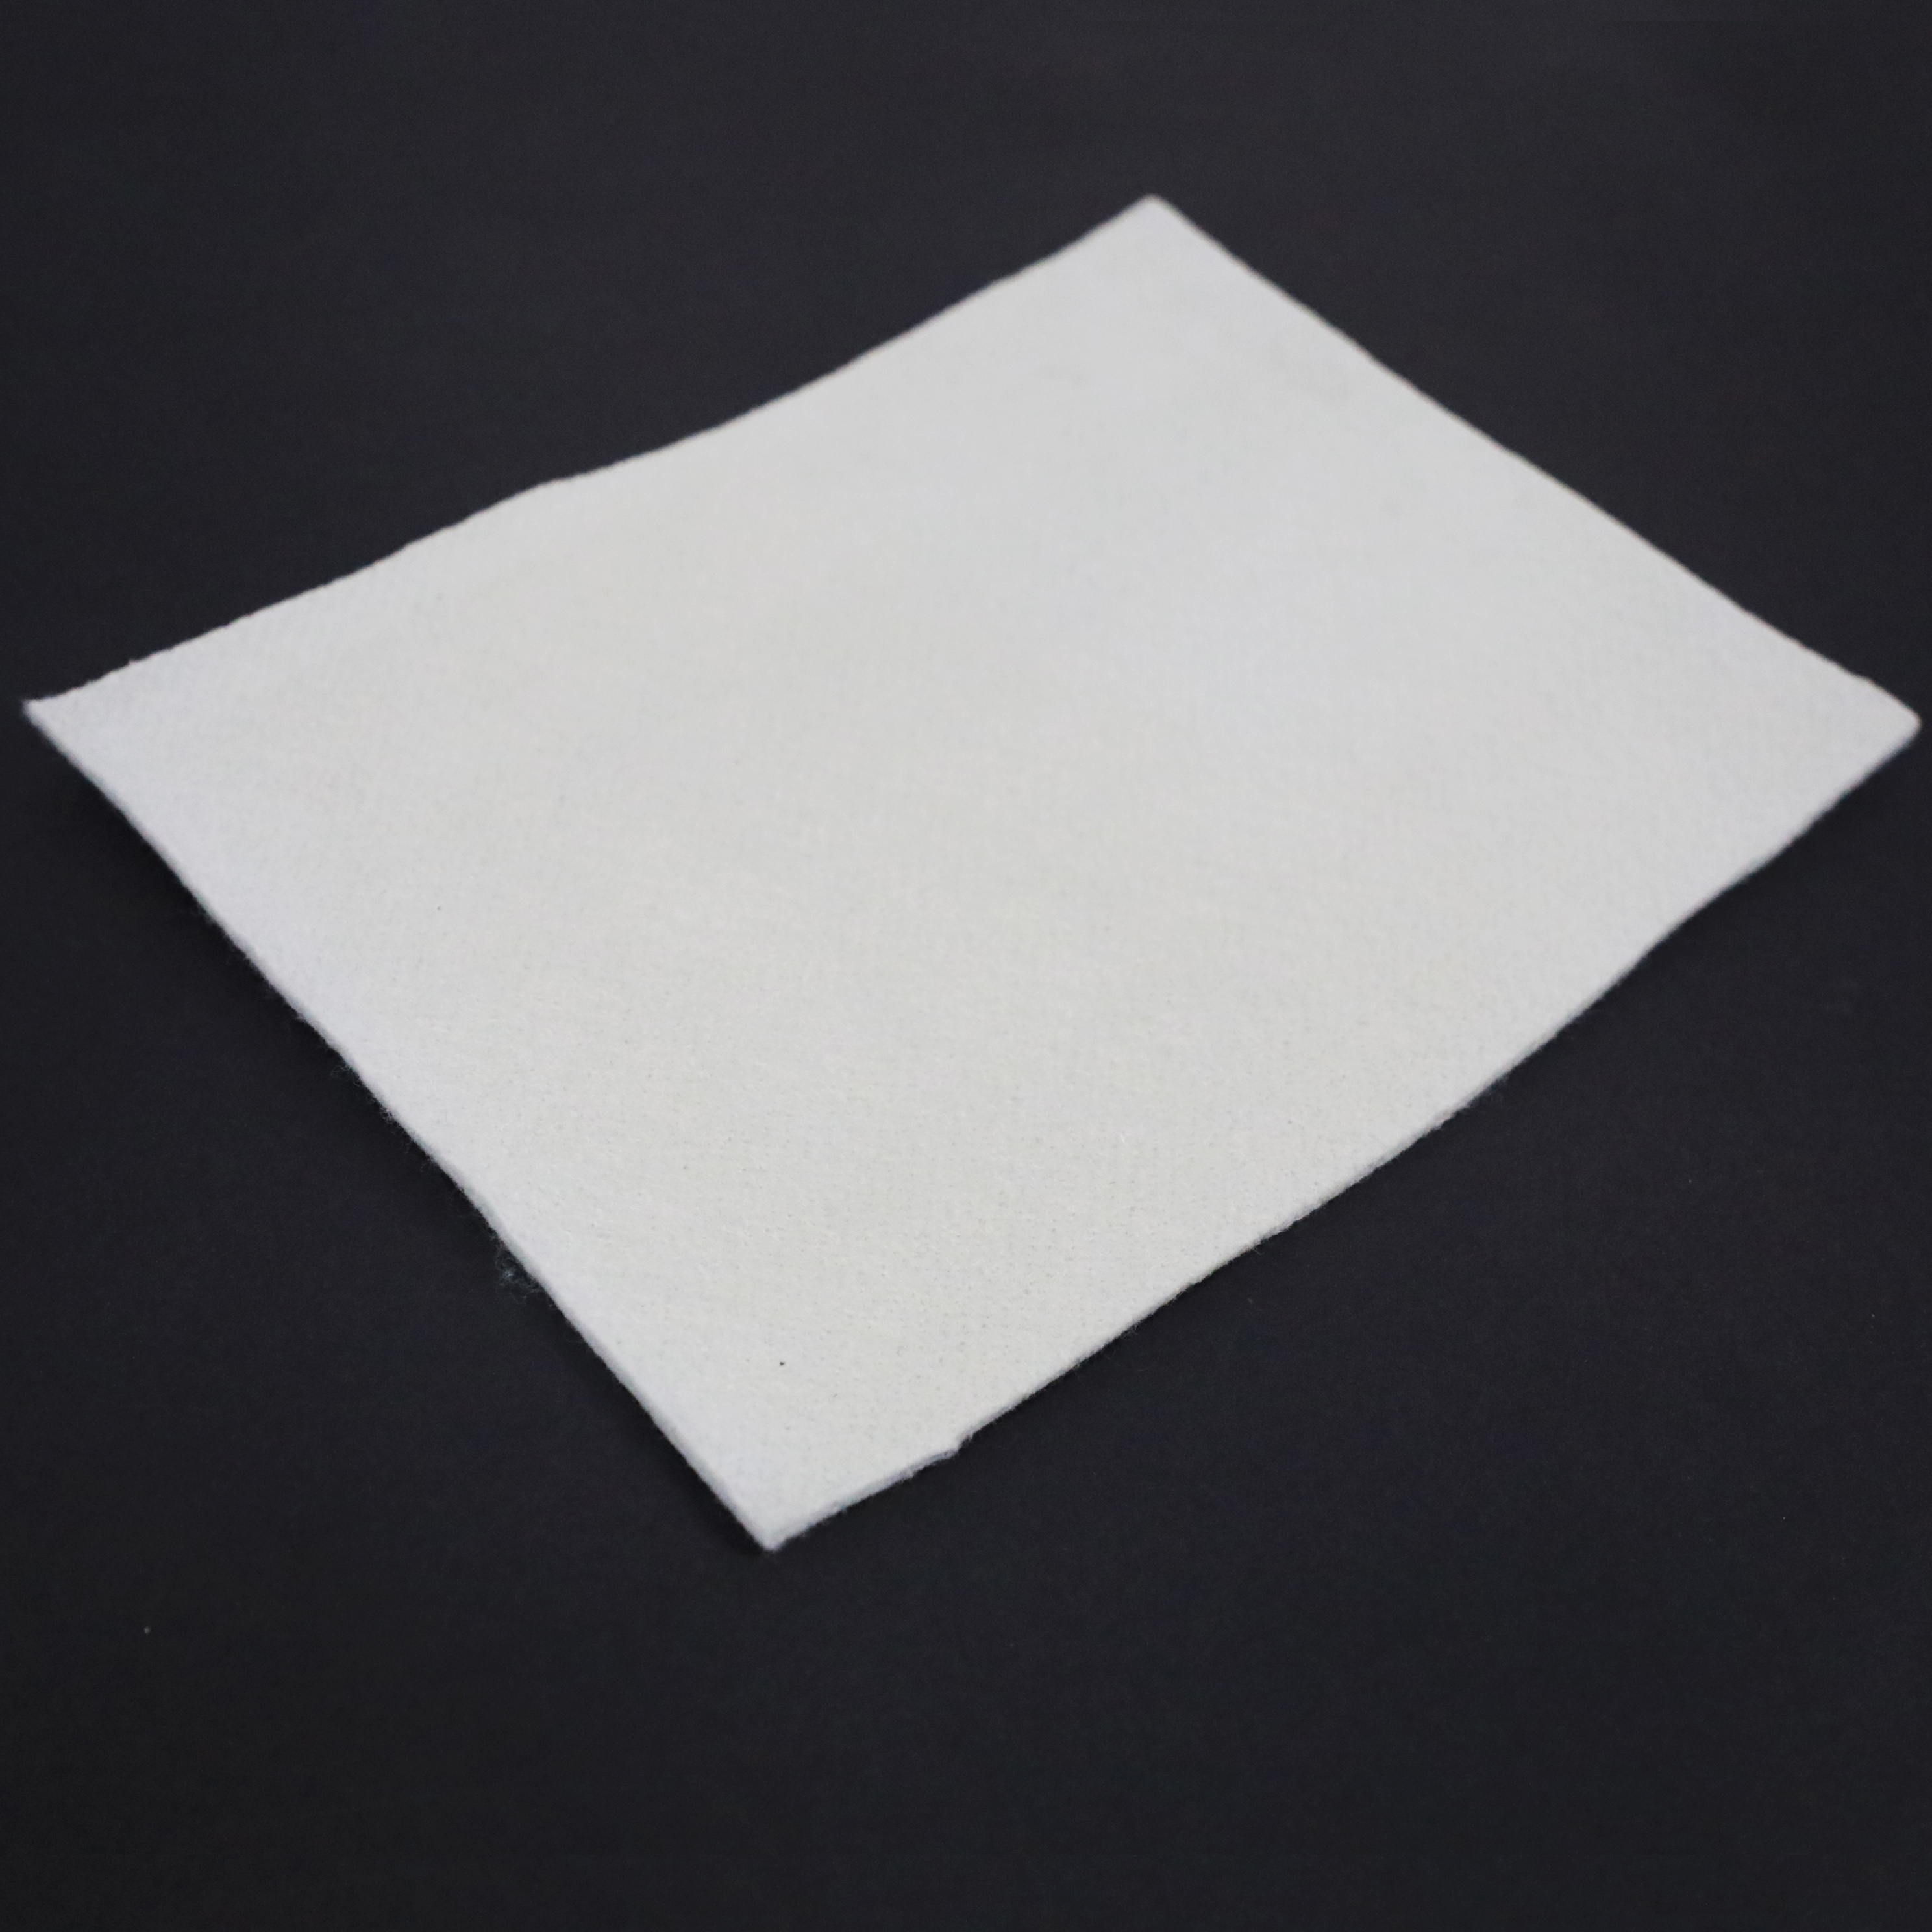 Filtration and isolation performance short fiber geotextile